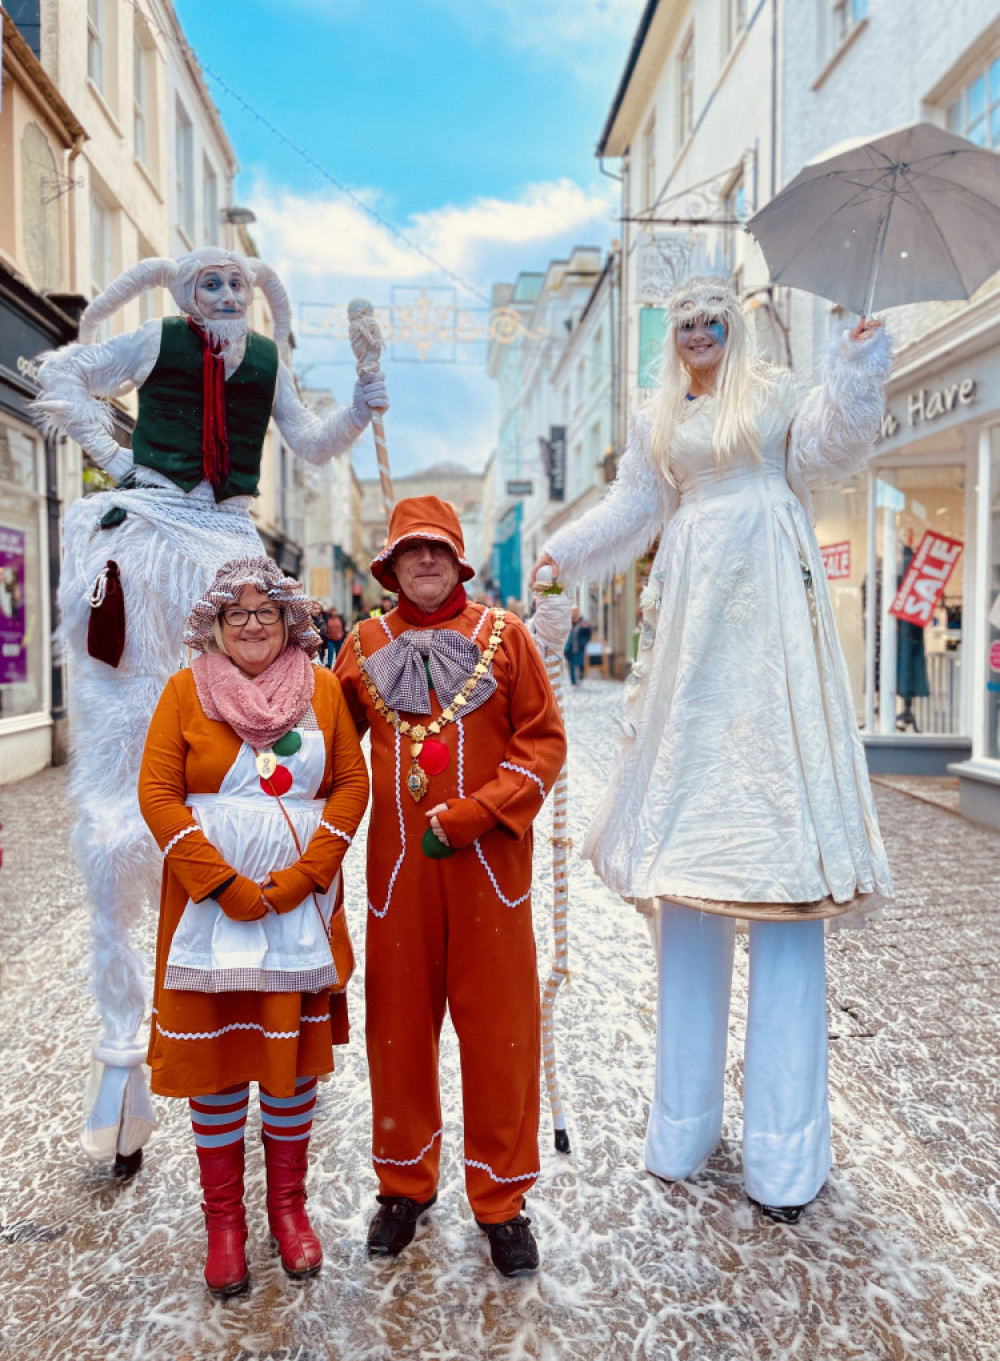 Cllr Steve Eva, Mayor of Falmouth and Mayoress Victoria with Christmas stilt walkers. (Image: Richard Wilcox/Falmouth BID)